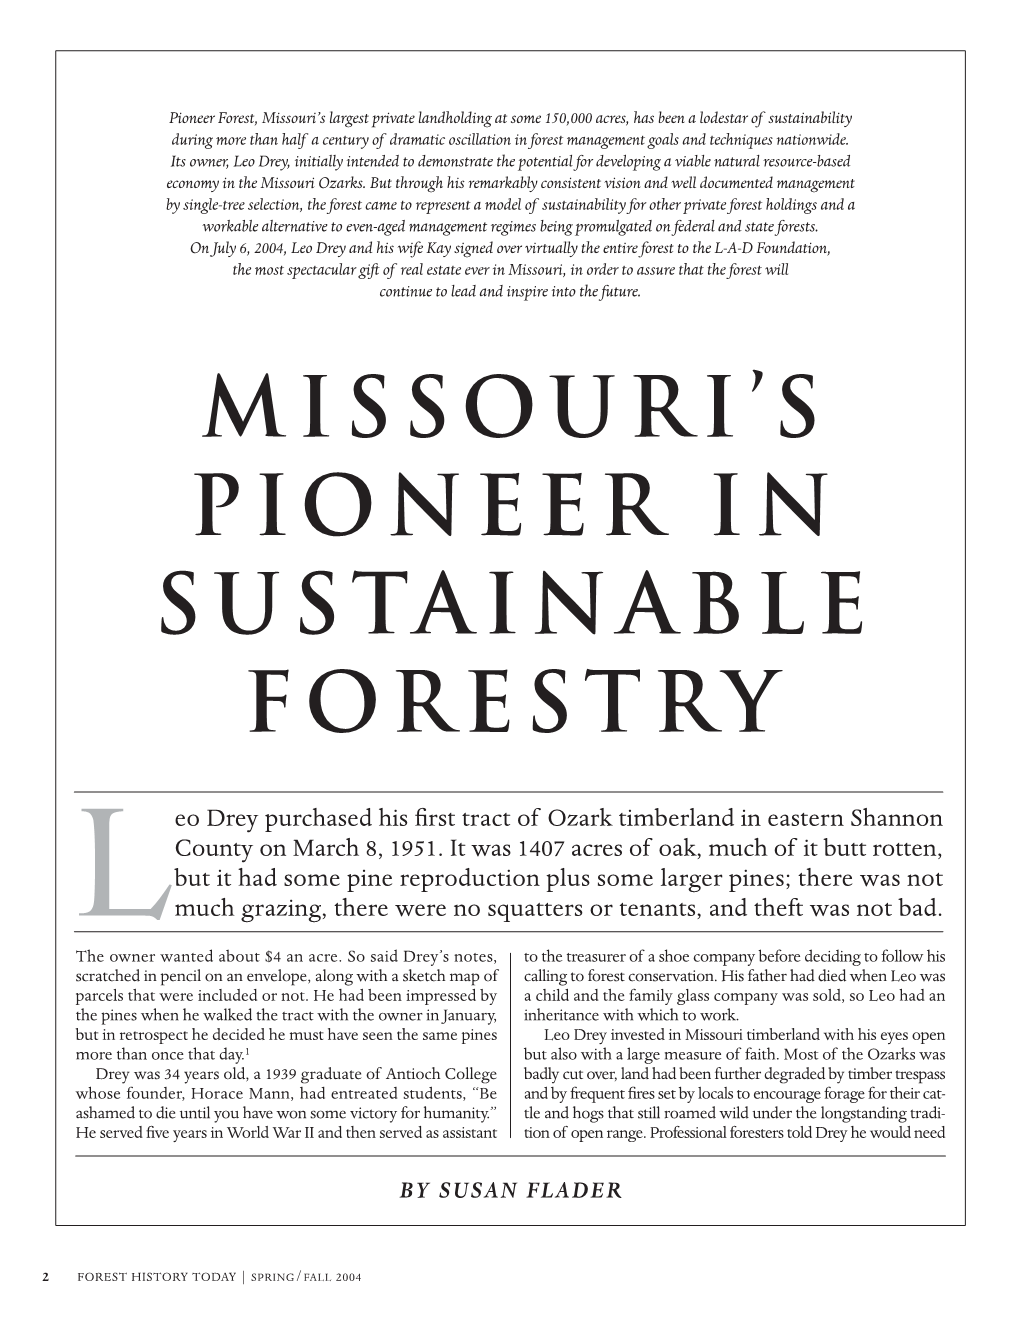 Missouri's Pioneer in Sustainable Forestry